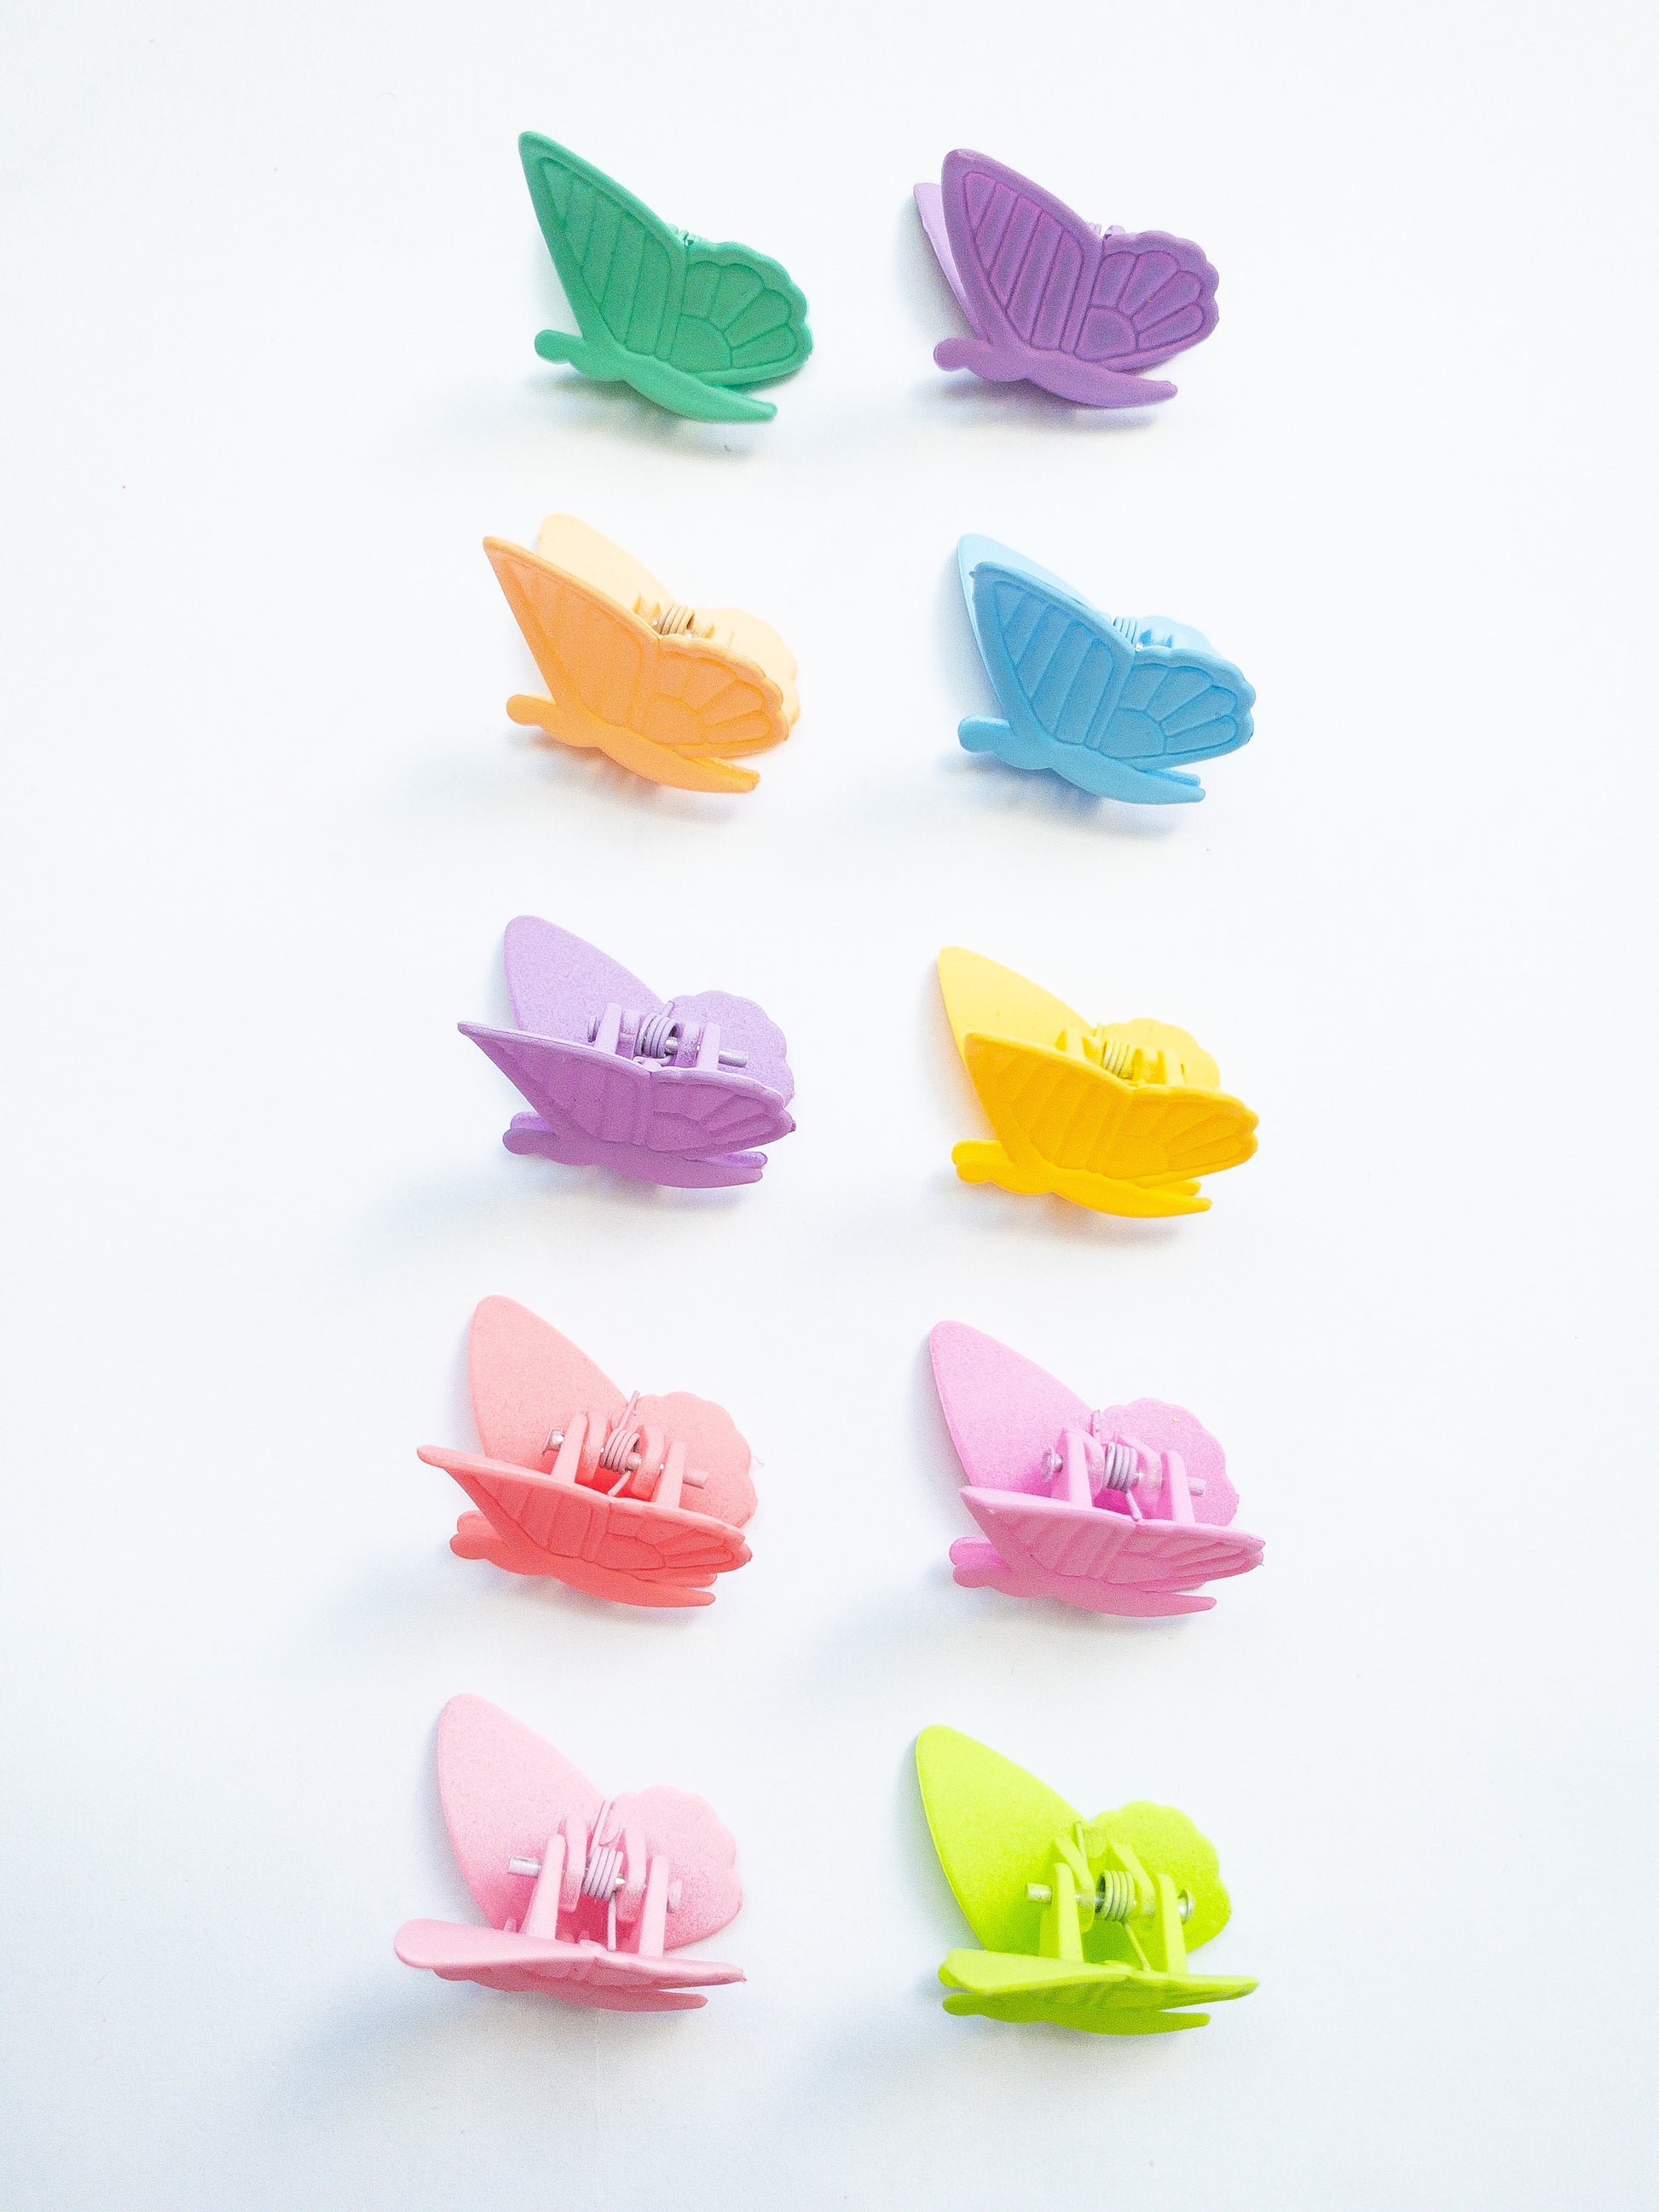 90s revival! Those butterfly claw clips you remember so well in yummy candy colors. This set comes with 10 pieces in a fun color mix of fluttering butterflies.